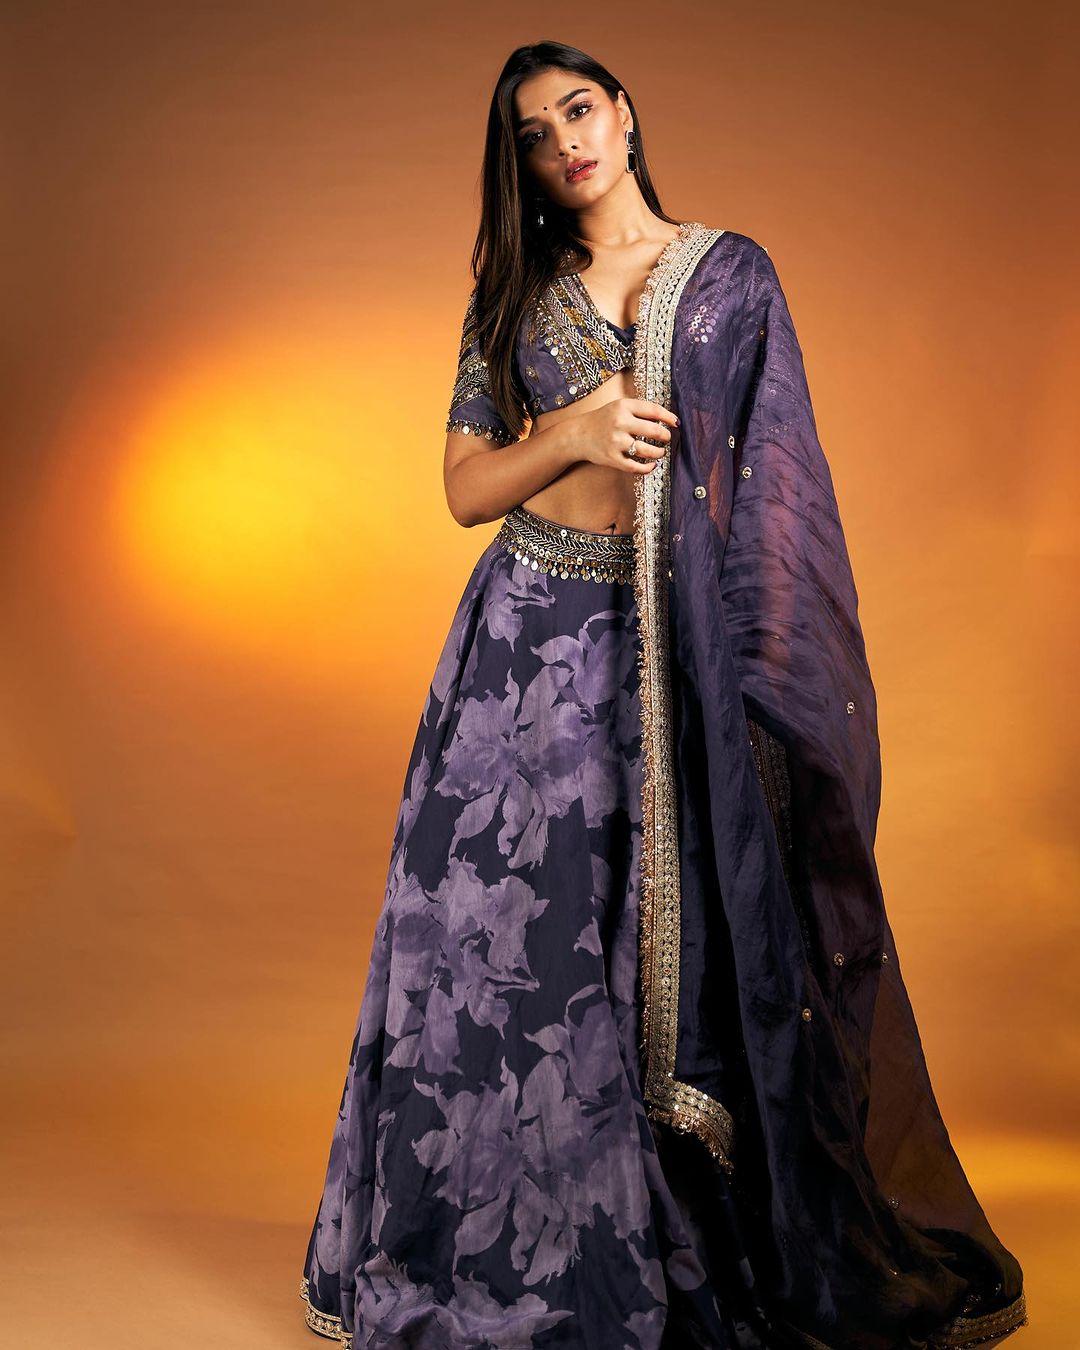 Saiee look is serving desi vibes in a purple lehenga with a contrasting blouse adorned with intricate embroidery. Her look strikes a perfect balance between regality and contemporary chic